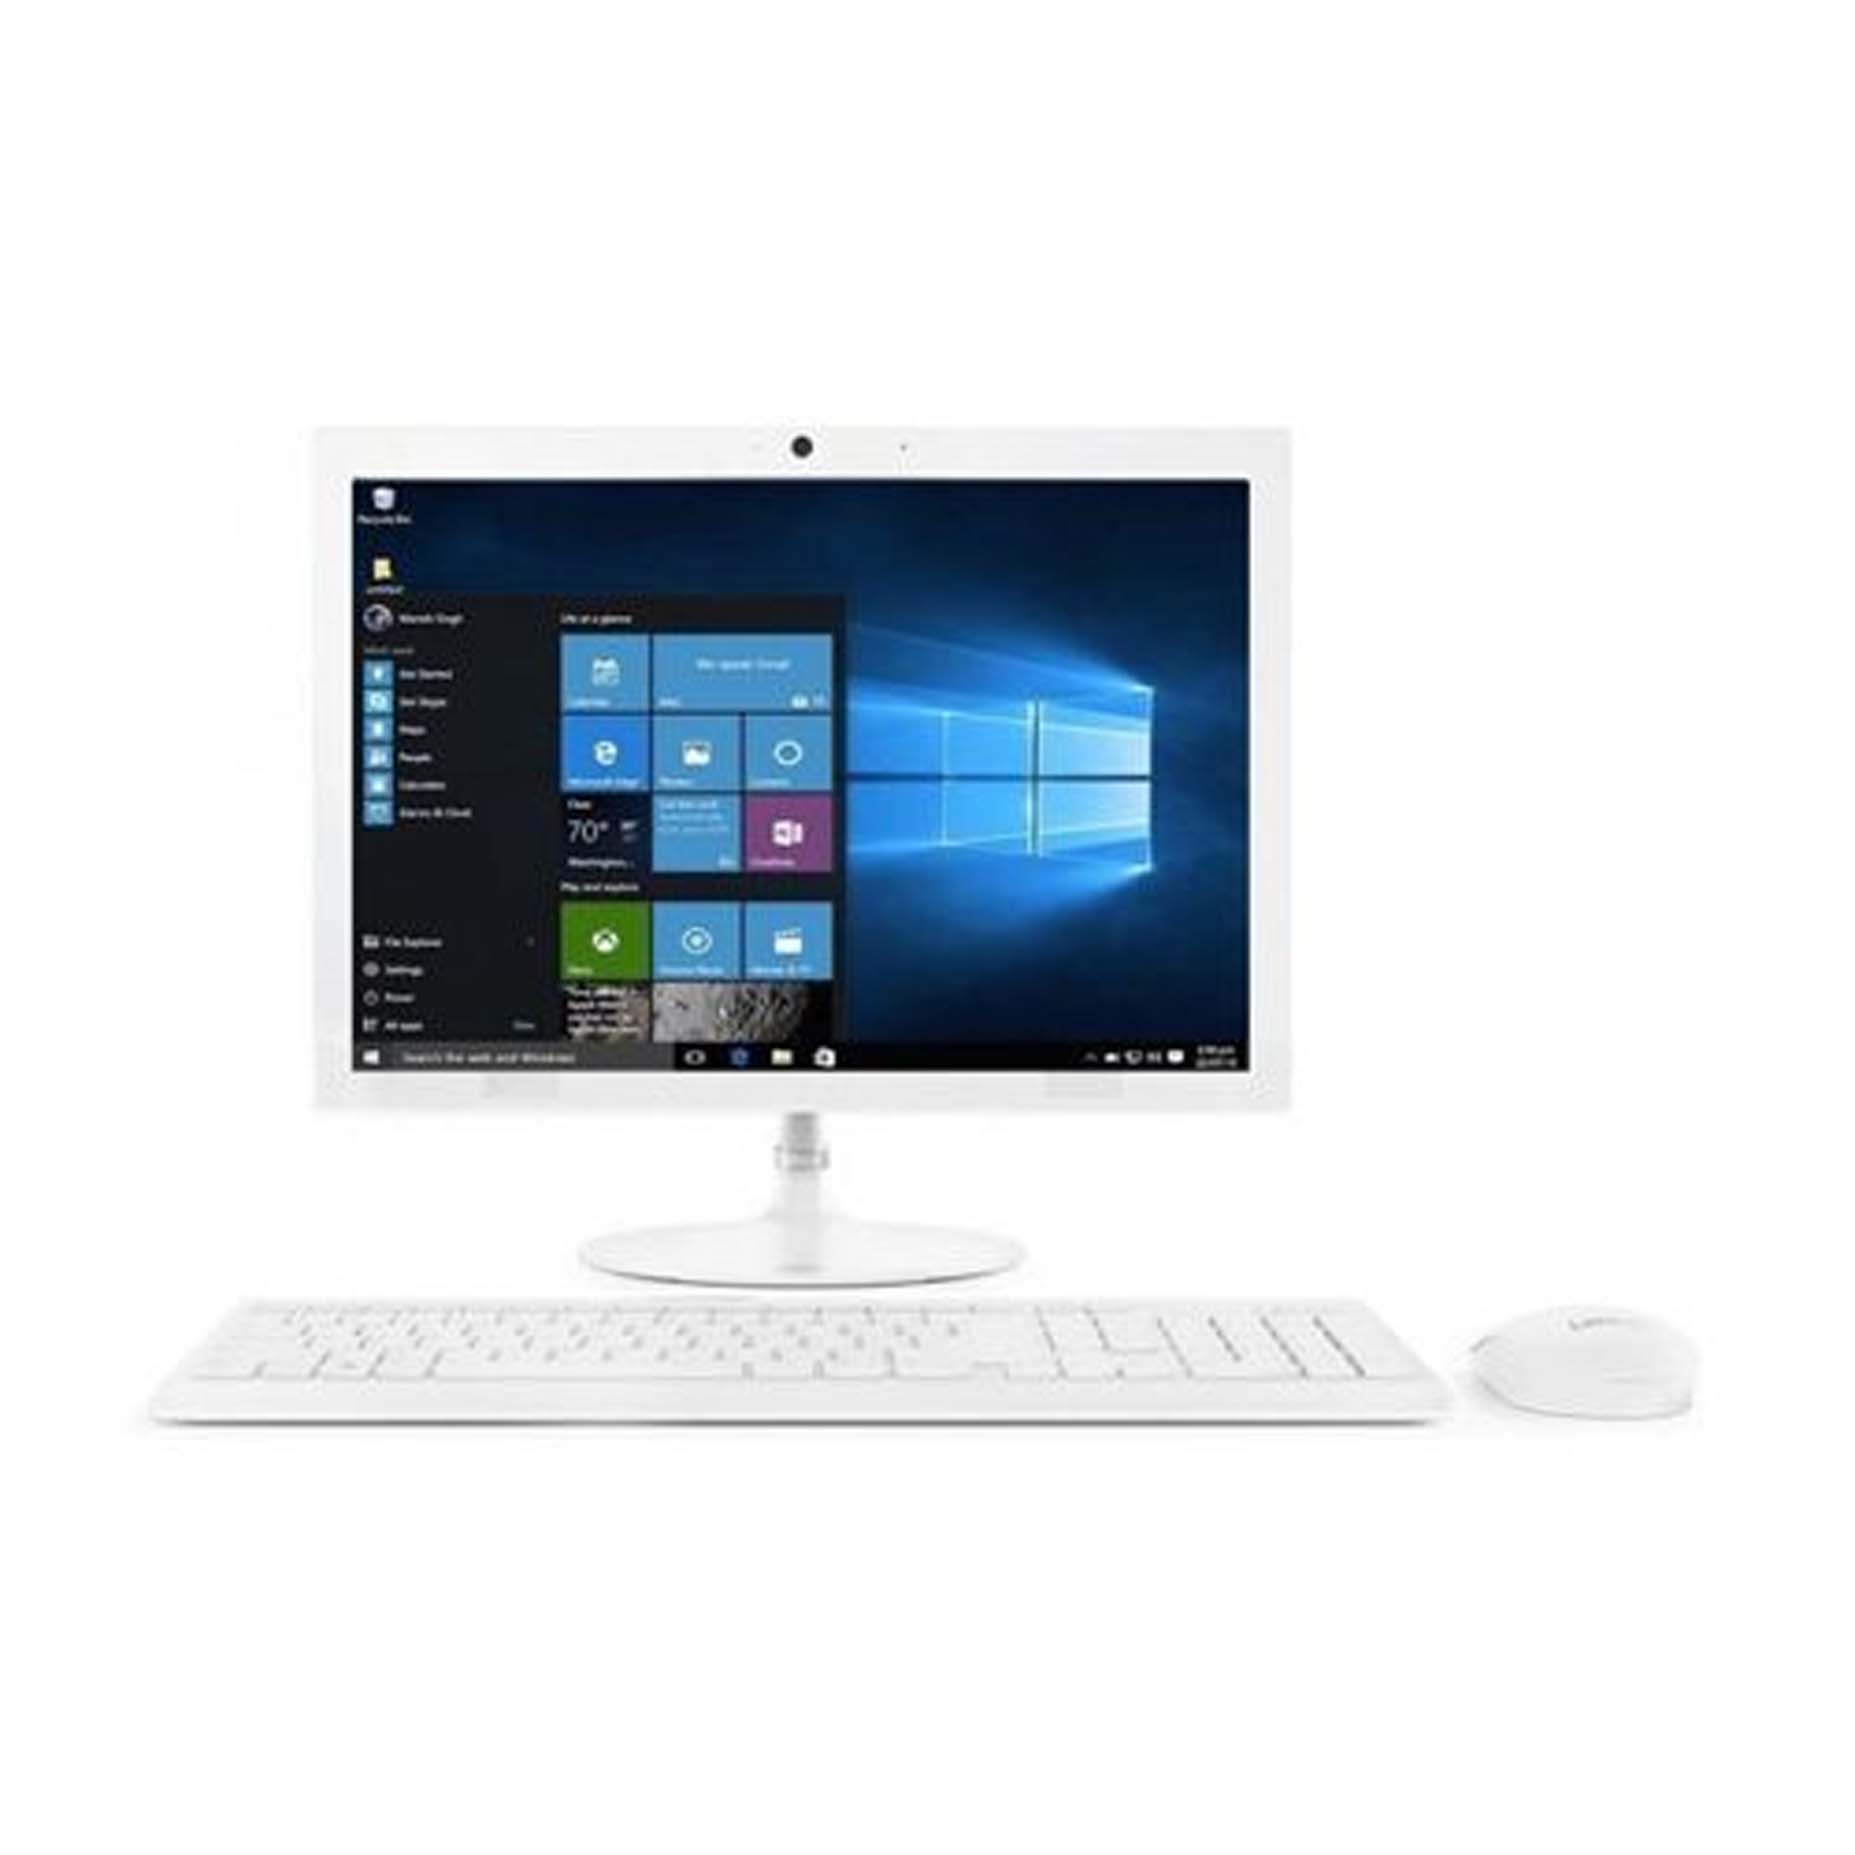 Harga Lenovo IdeaCentre 330-20AST 1HID All in One AMD A6-9200 4GB 1TB Integrated Win10 19.5 Inch White